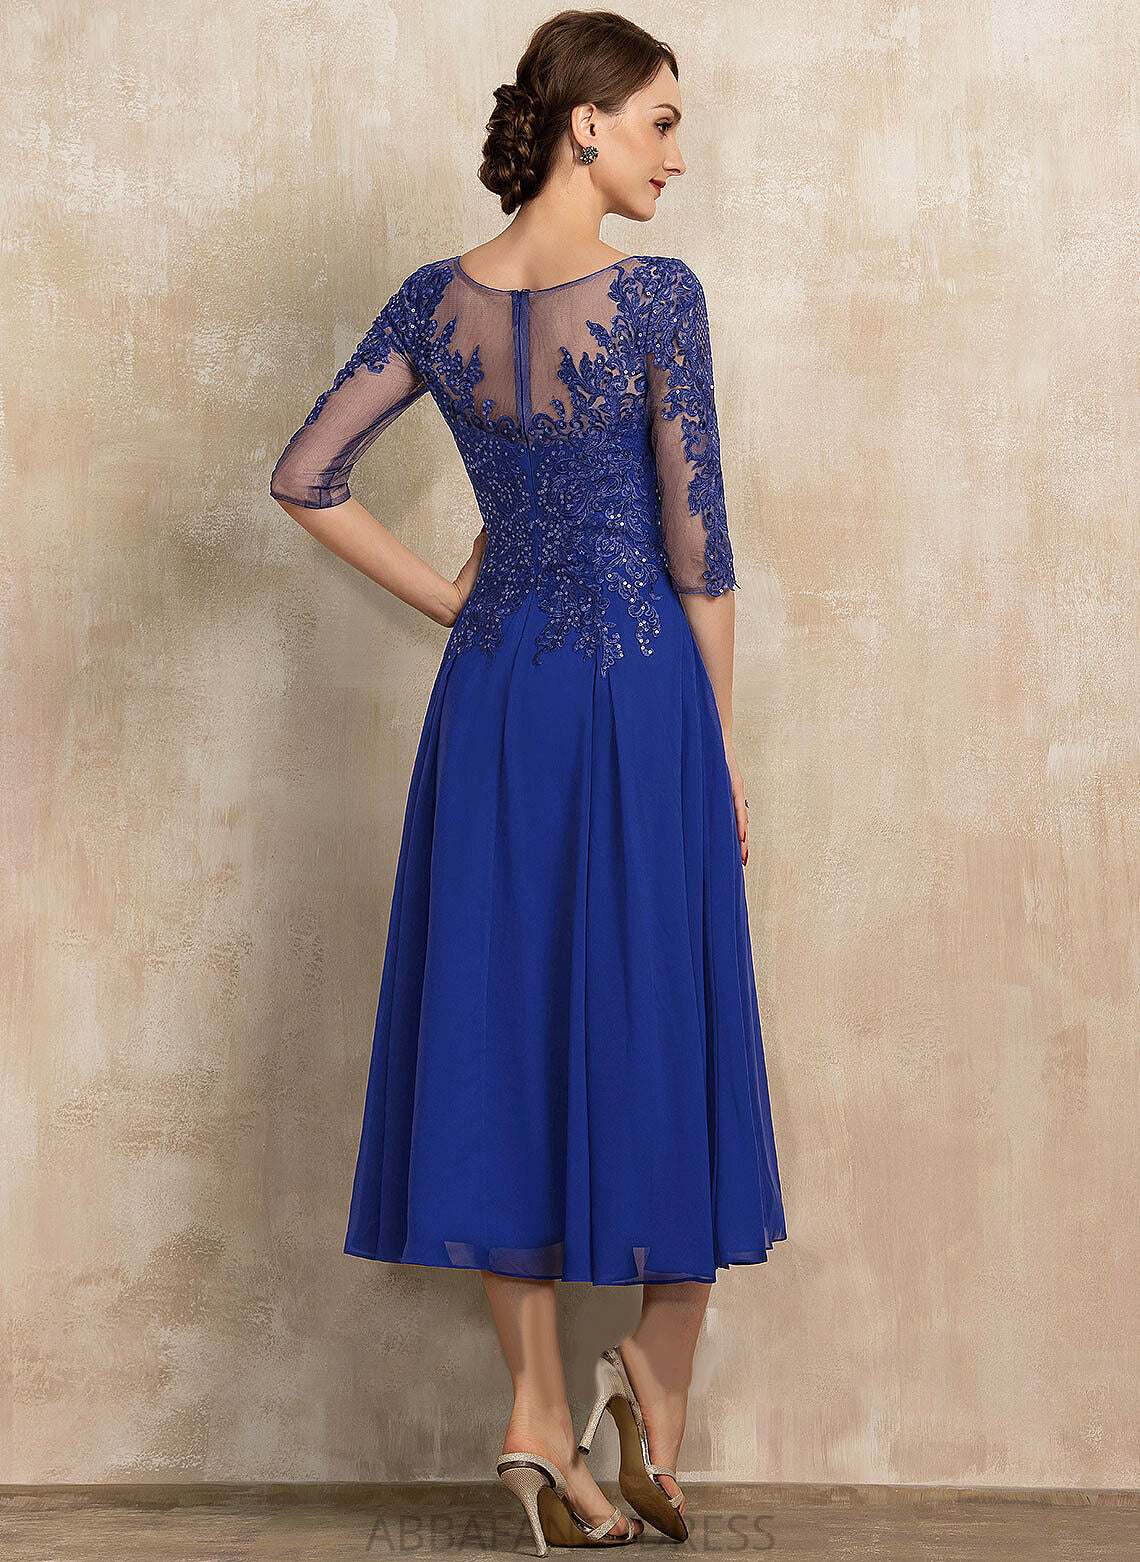 Scoop Sequins Dress Bride Mother Lace the Tea-Length Chiffon of Mira Neck A-Line With Mother of the Bride Dresses